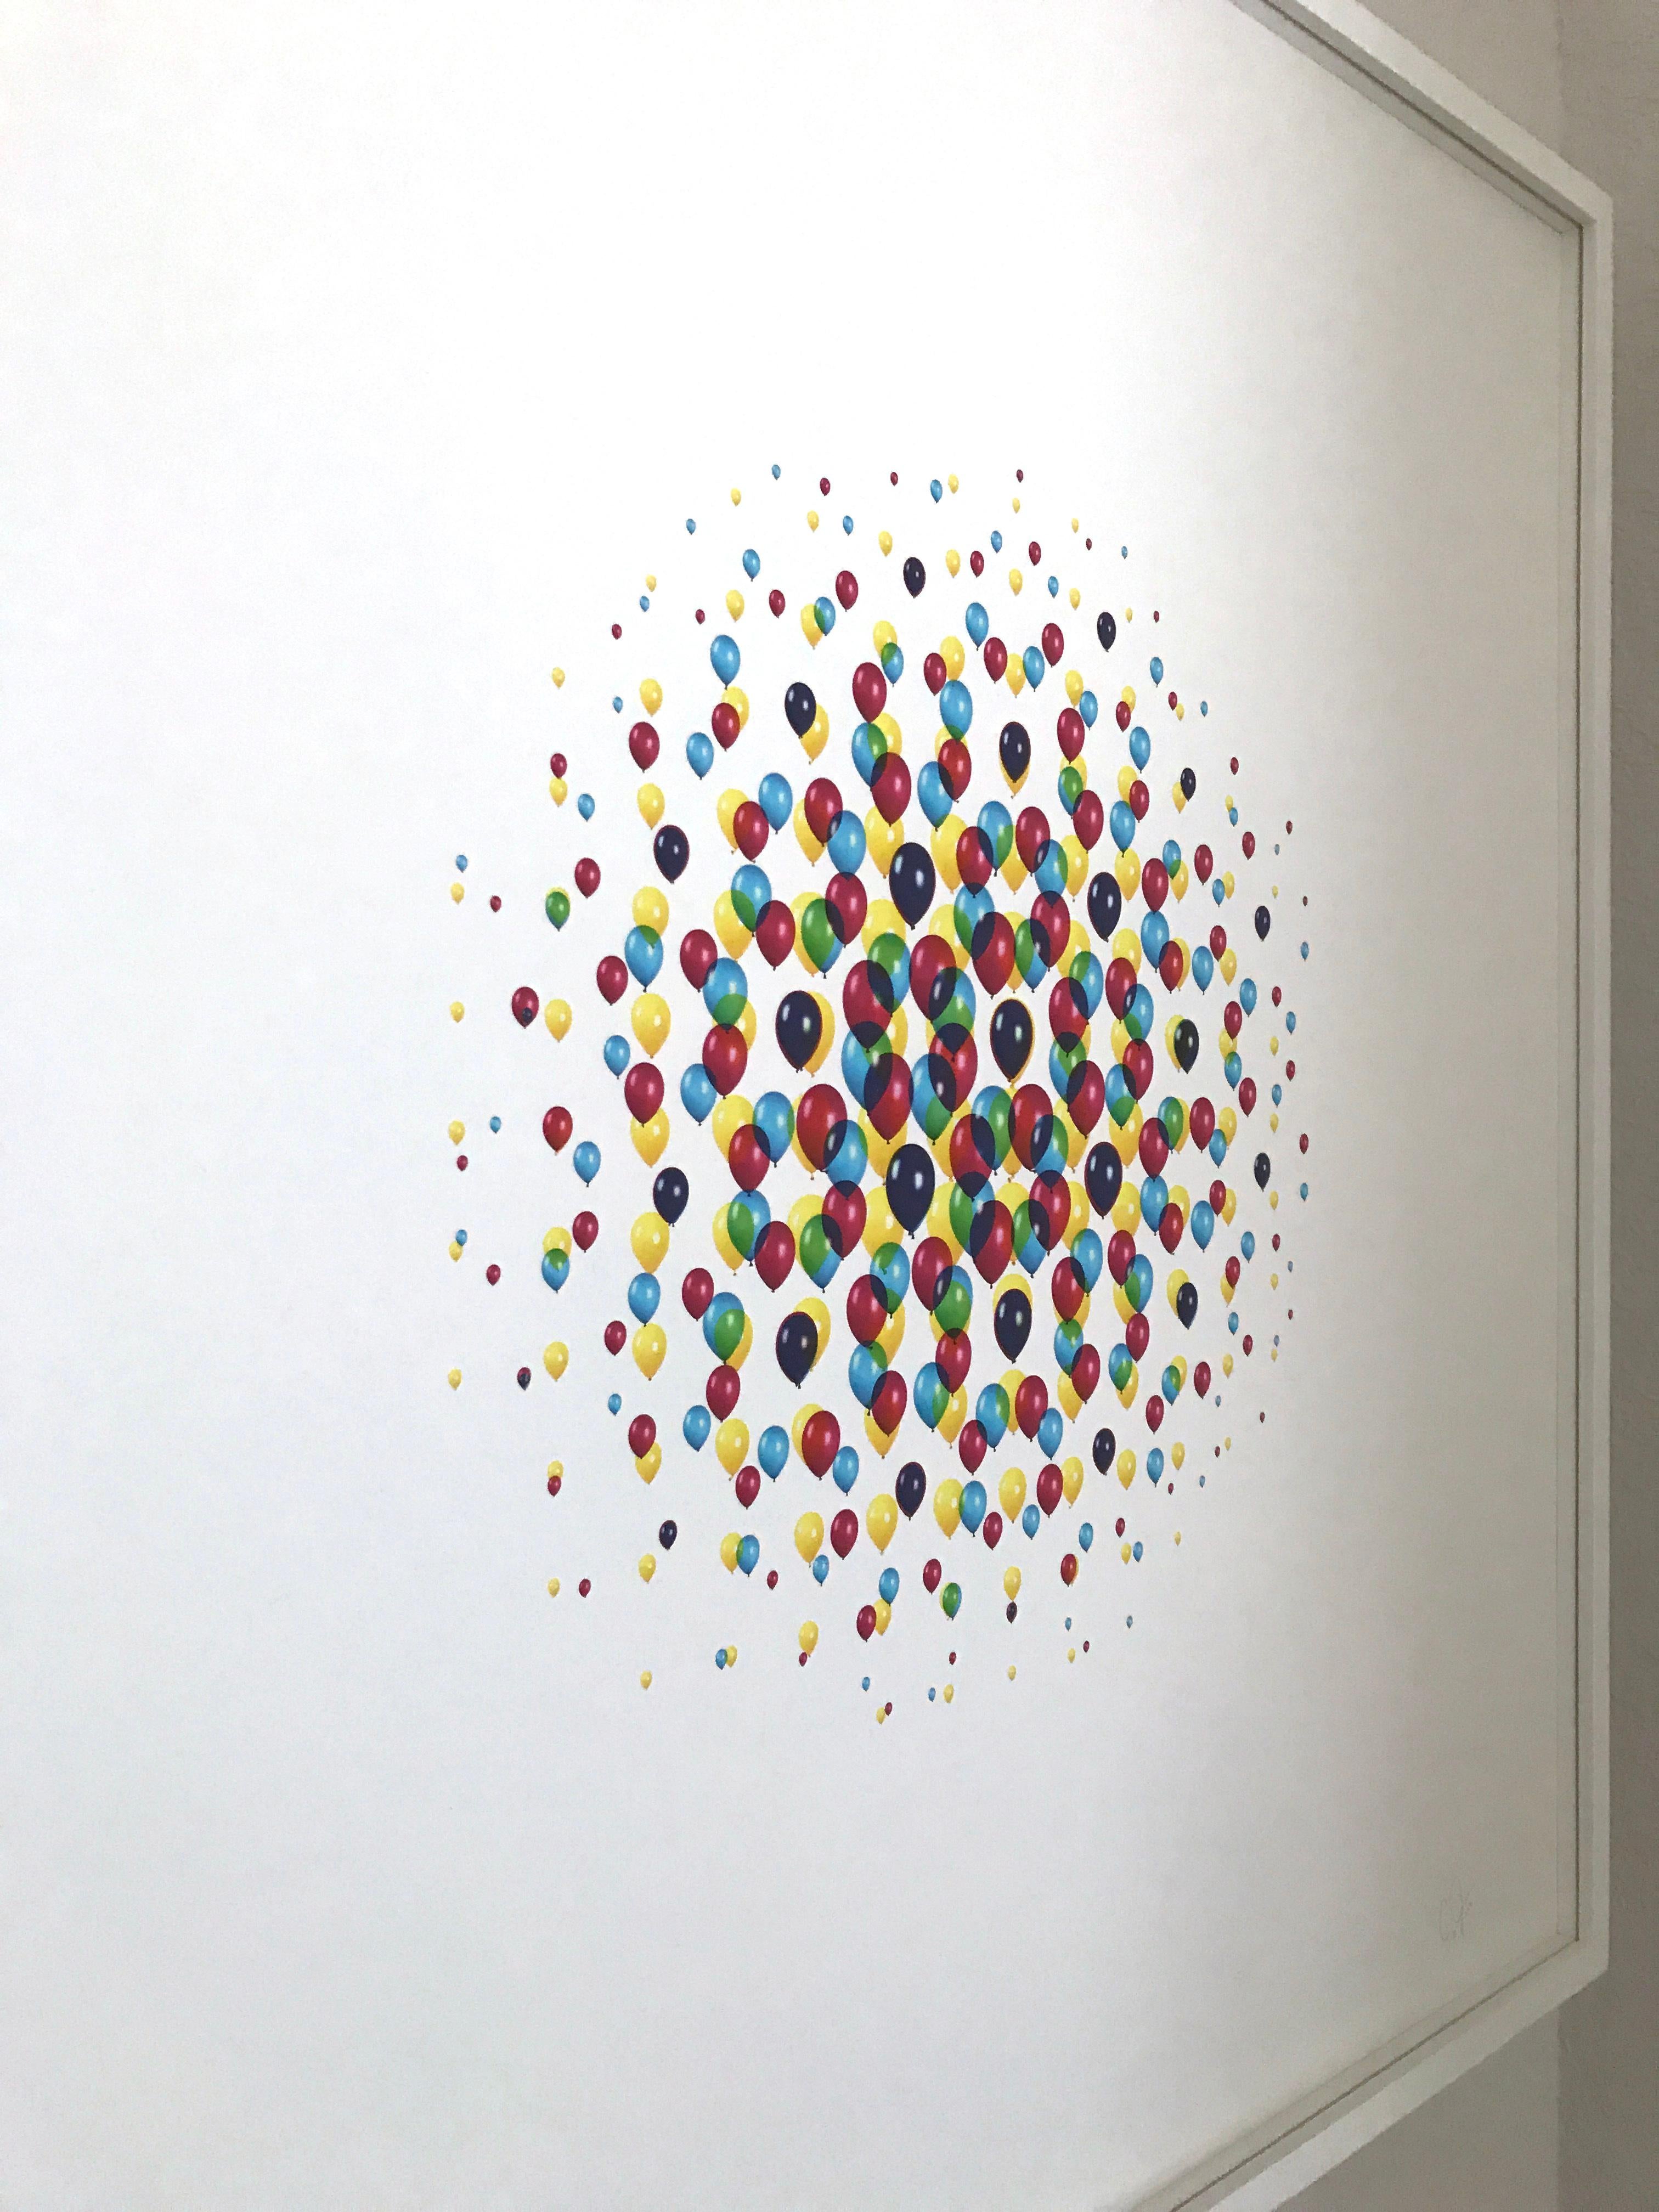 See Me From Afar is a contemporary archival inkjet print by artist Cassandra C. Jones. This print shows a collage of colorful balloons, varying in size and color, that gradually disappear into the stark white background of the piece. This circular